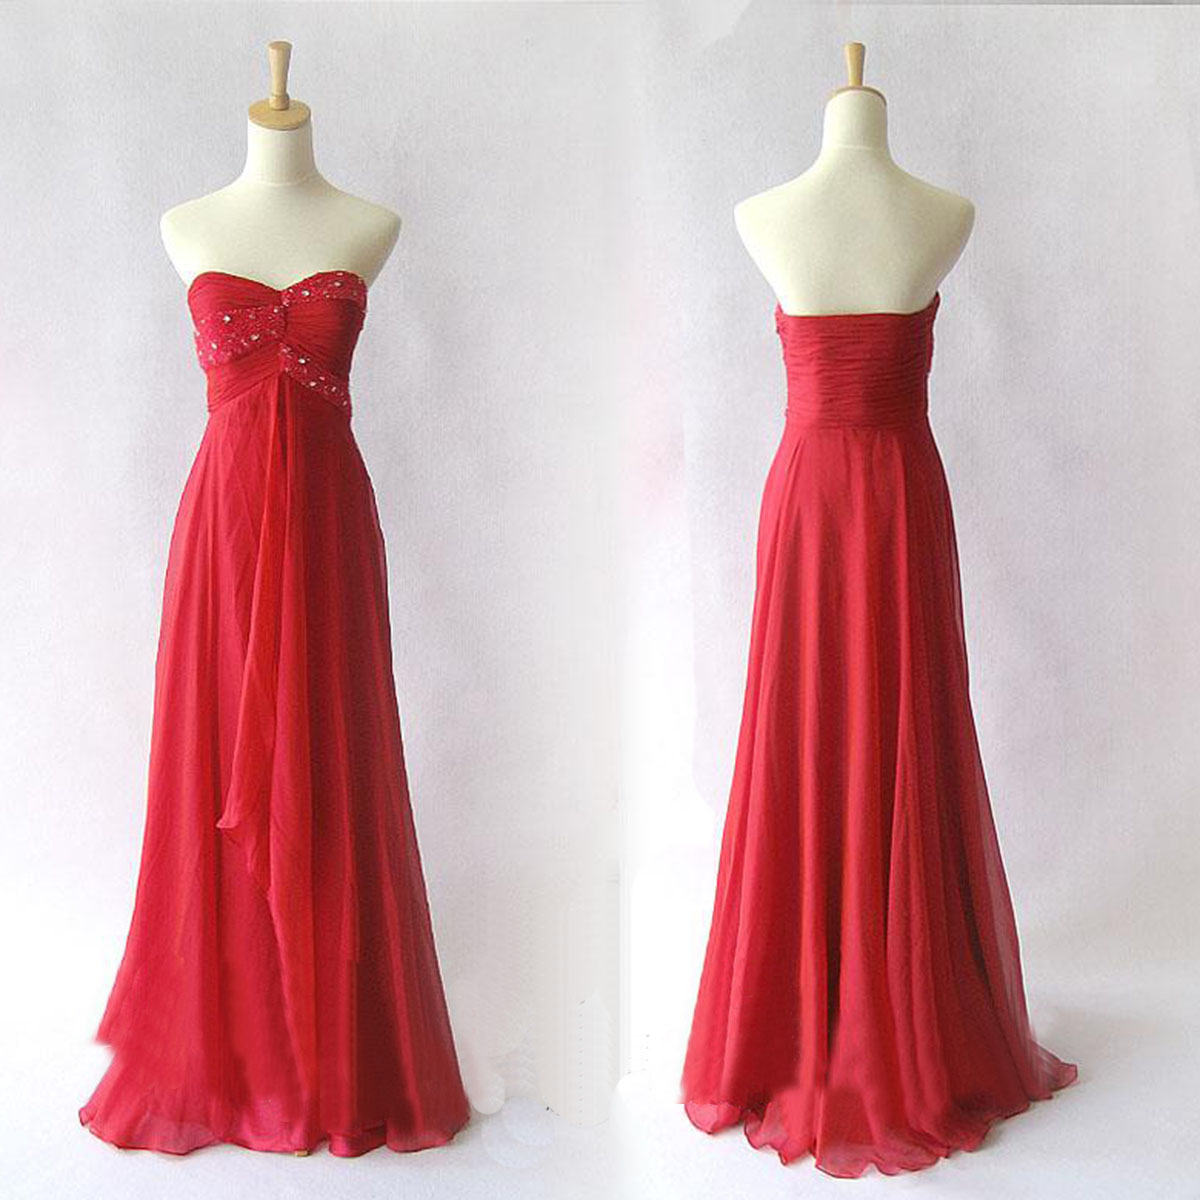 Red Unique Prom Dress,strapless Sweetheart Empire Waist Beaded Red Chiffon Floor Length Women Formal Homecoming Evening Dress,party